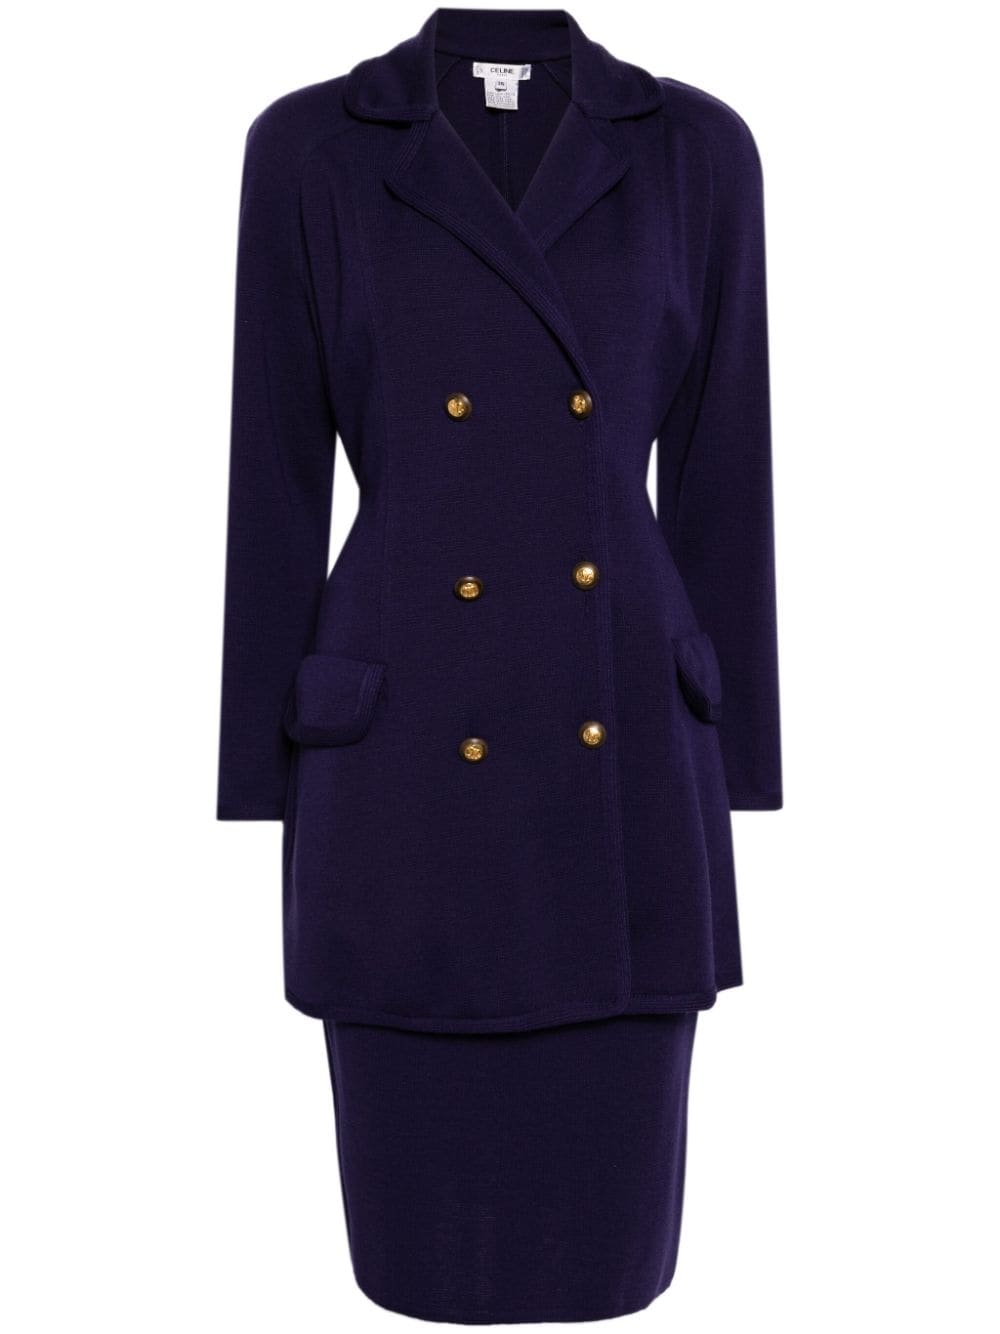 Céline Pre-Owned double-breasted wool skirt suit - Purple von Céline Pre-Owned